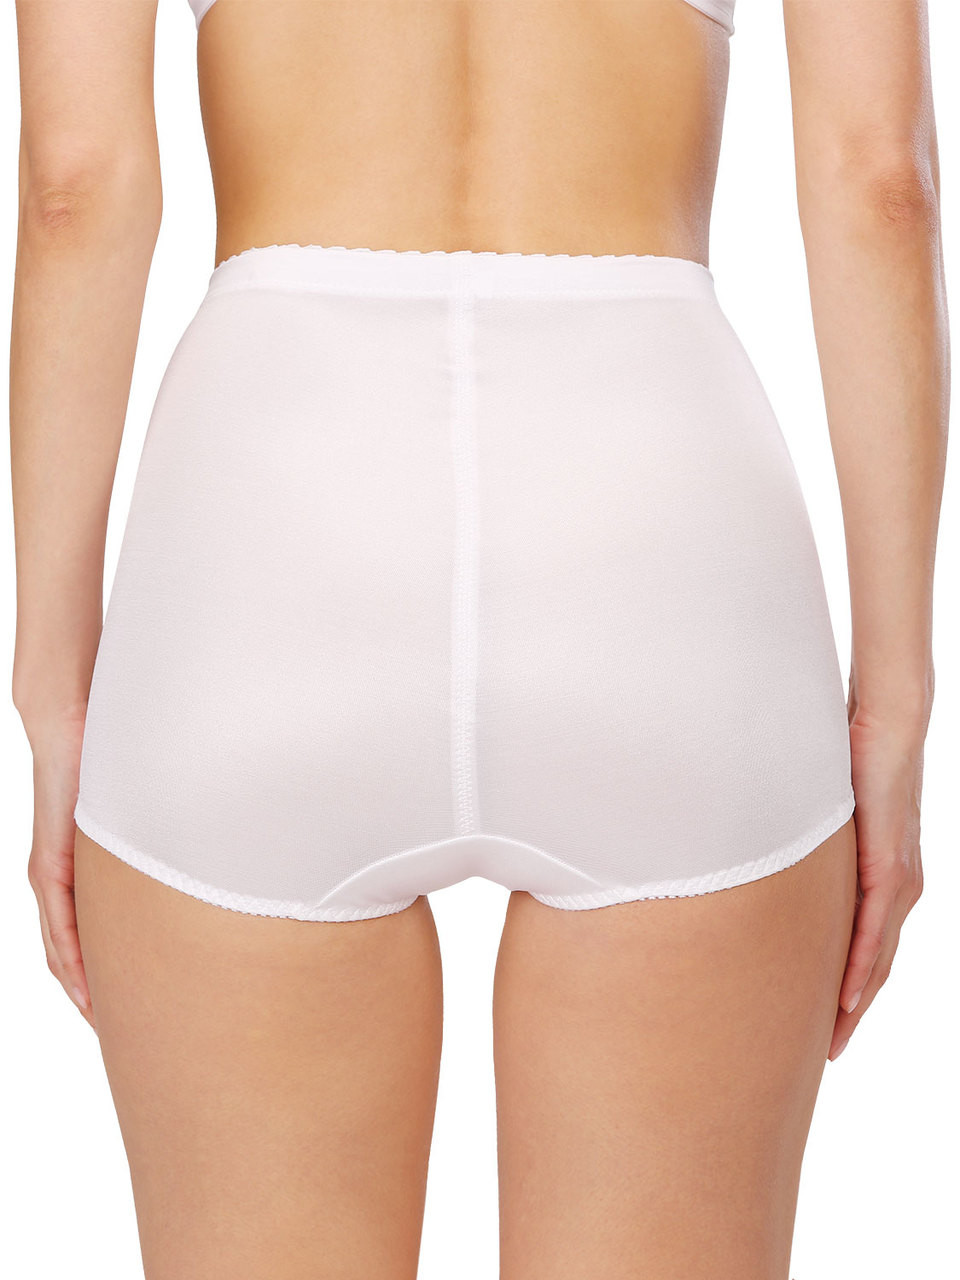 Naturana Double Reinforced Front Panty Girdle with Supporting Seams 0029  (L-4XL)